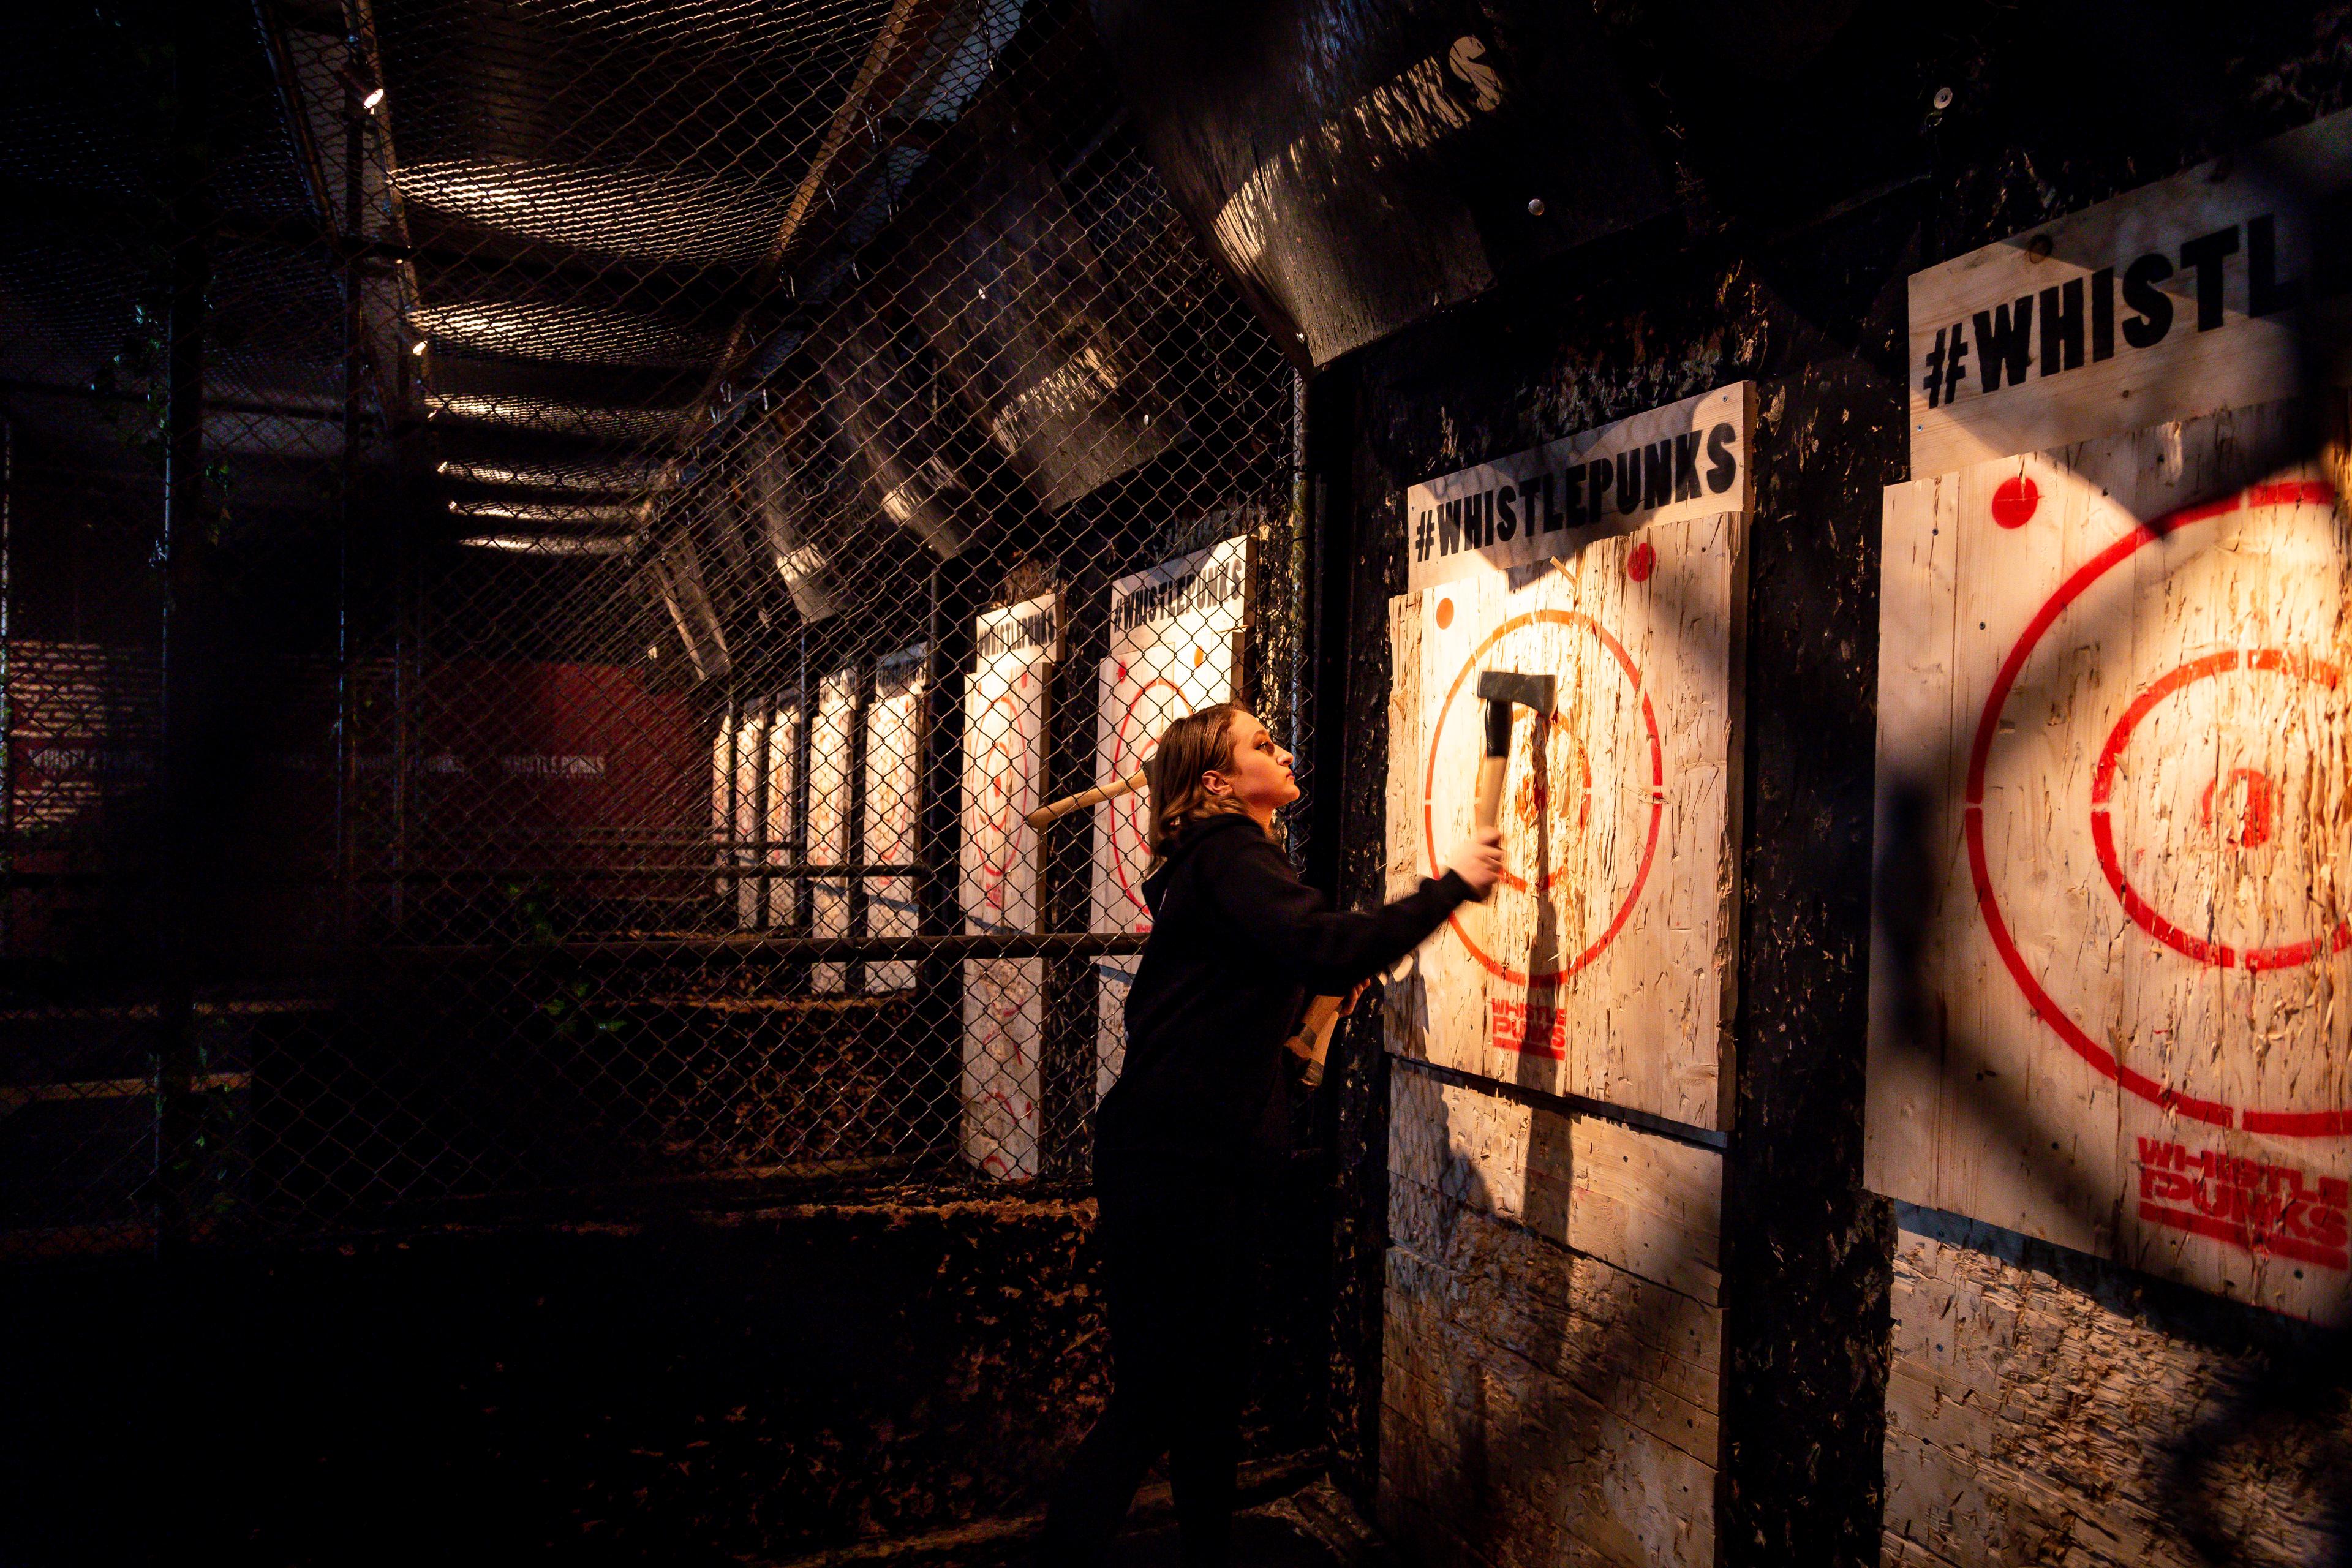 Whistle Punks Manchester, Whistle Punks Urban Axe Throwing Deansgate photo #6